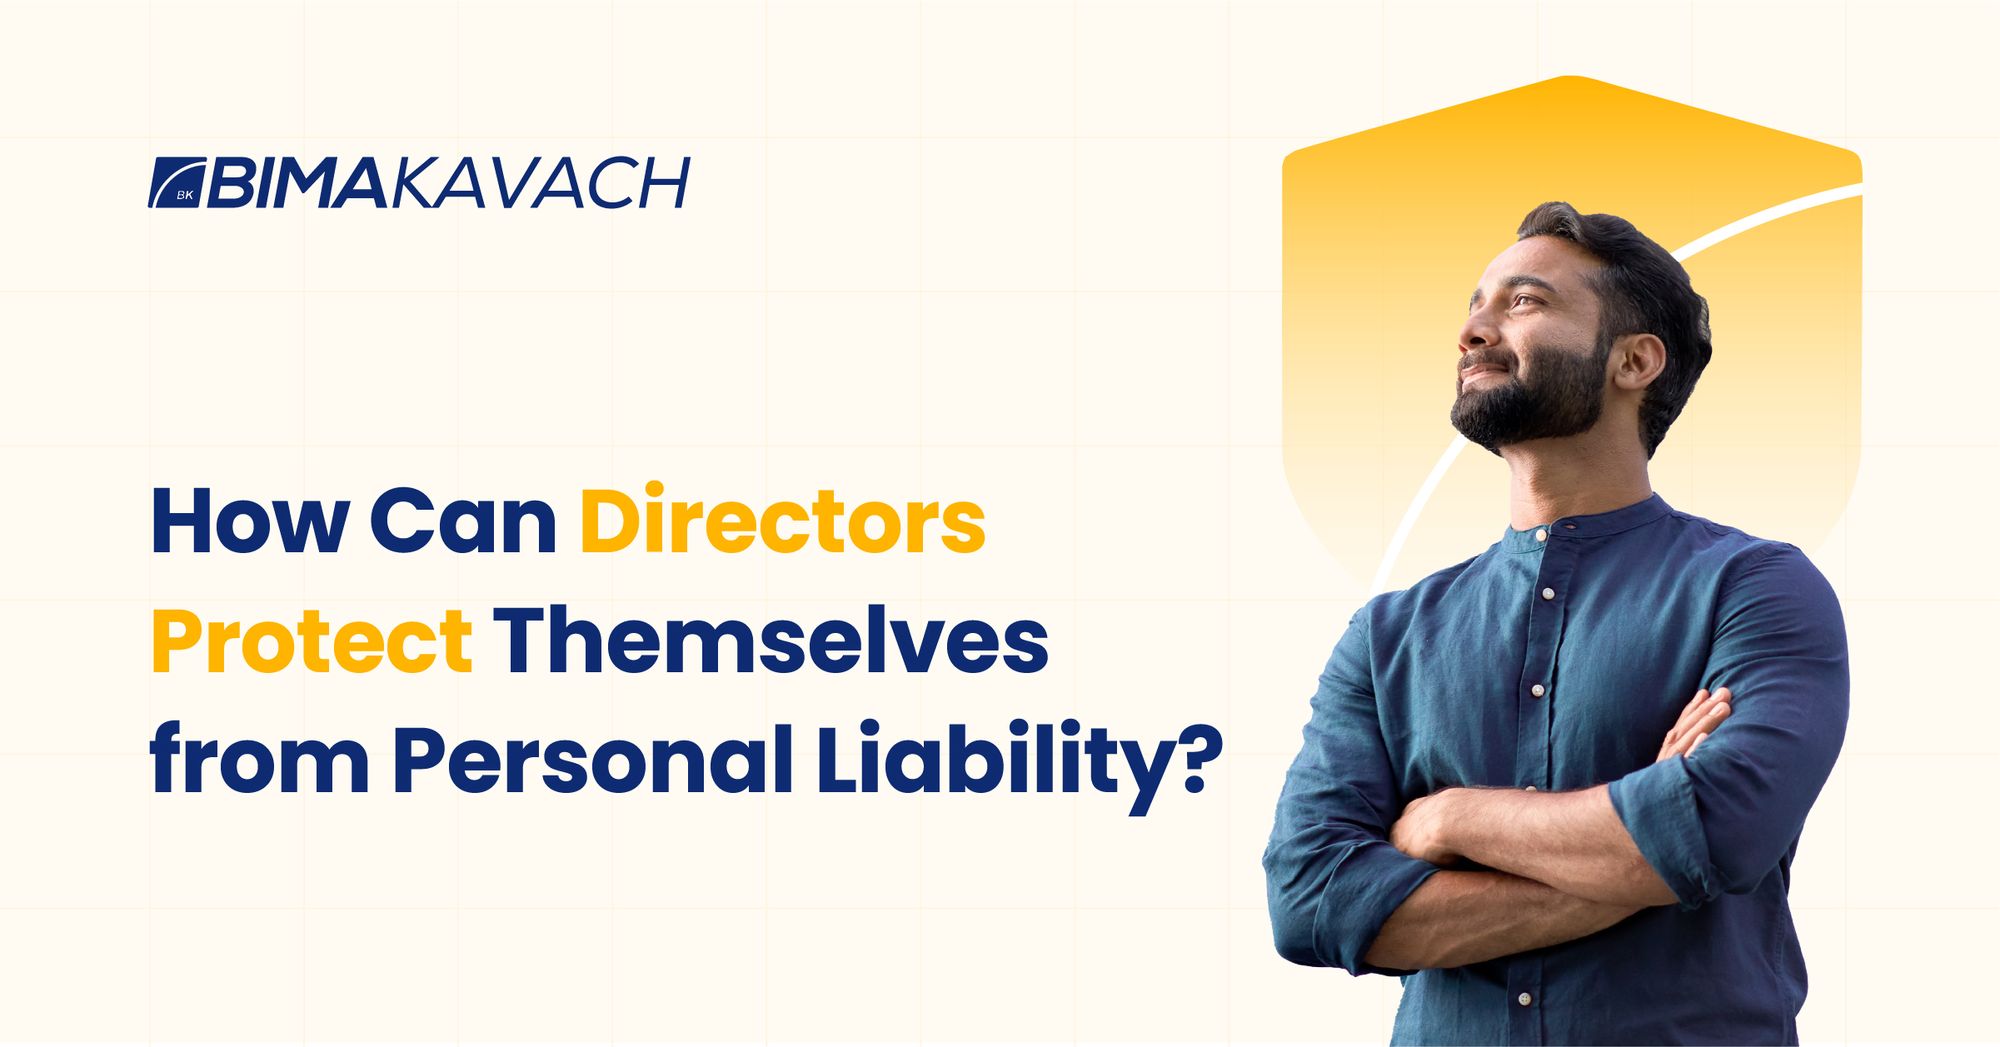 How Can Directors Protect Themselves from Personal Liability